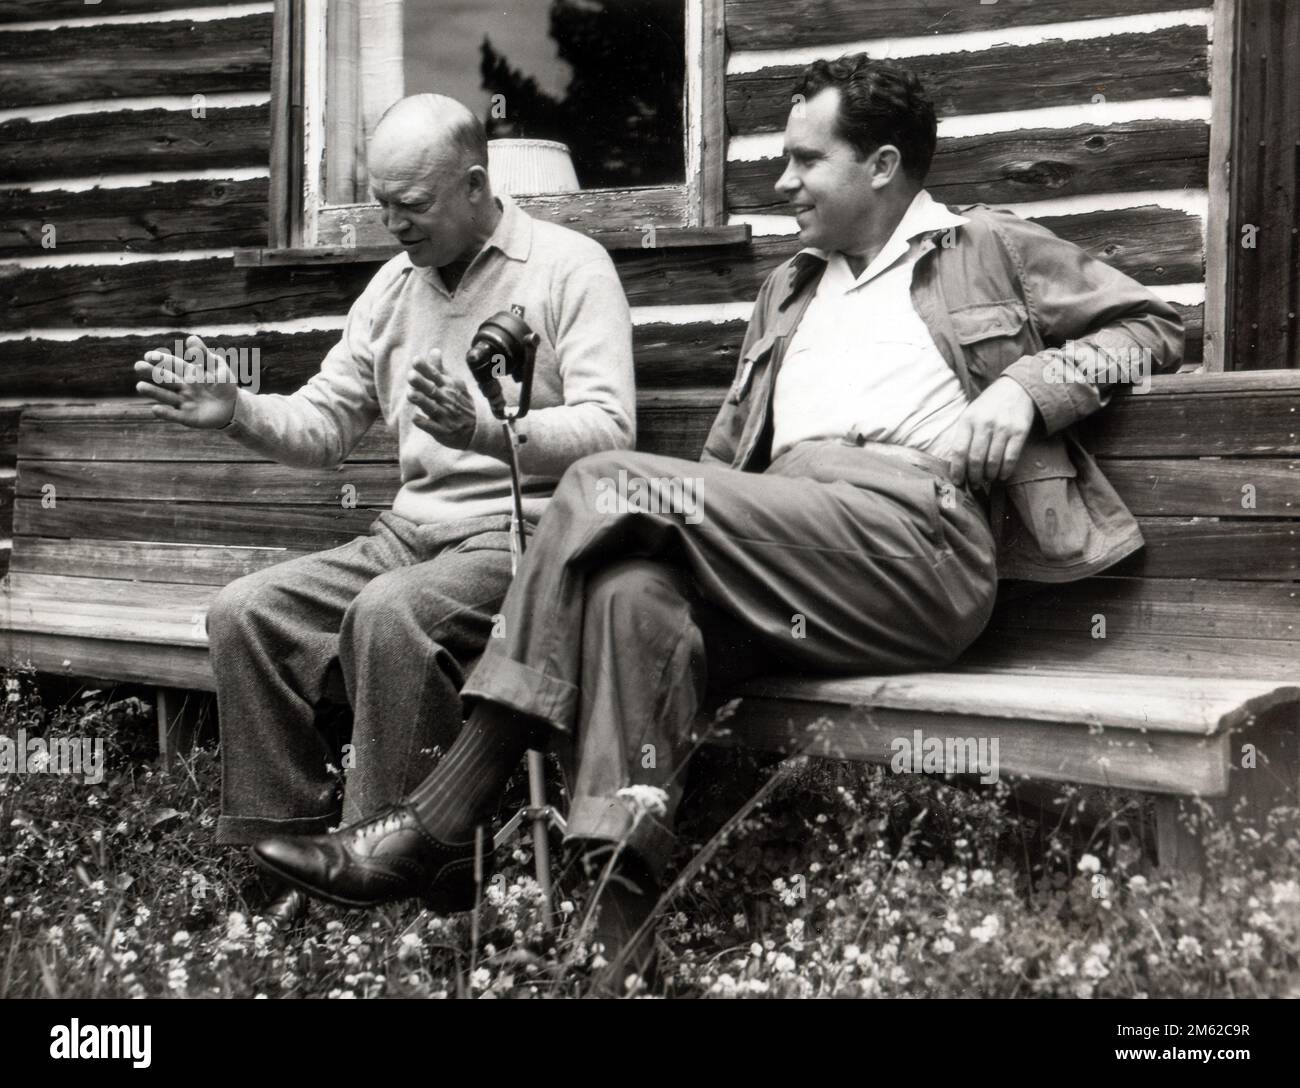 Future Presidents Dwight D. Eisenhower and Richard Nixon enjoying a Chat in July 1952 Stock Photo